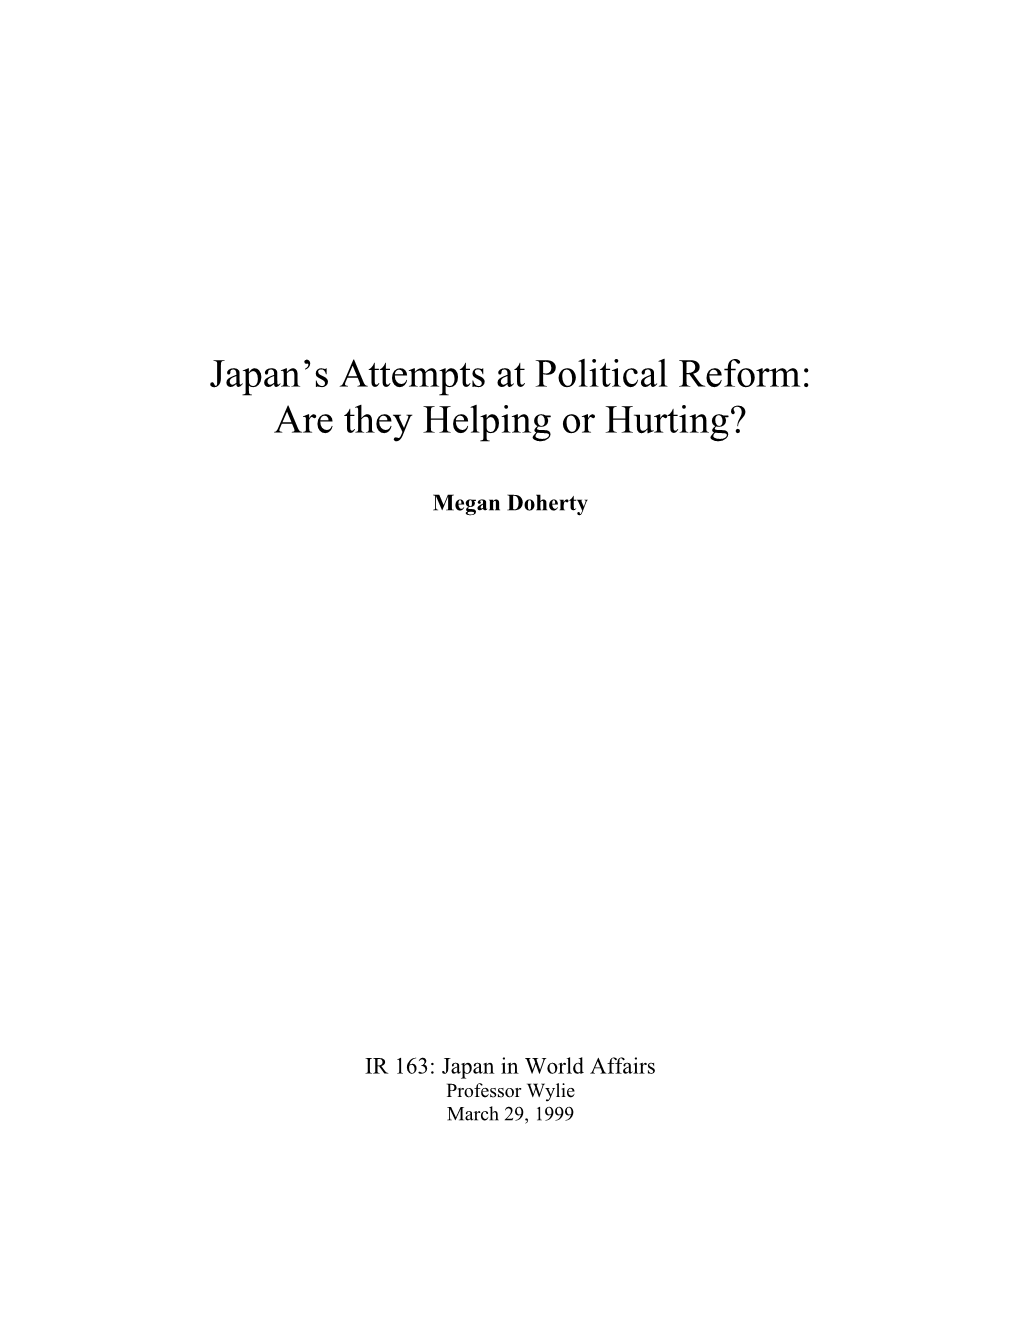 Japan's Attempts at Political Reform: Are They Helping Or Hurt